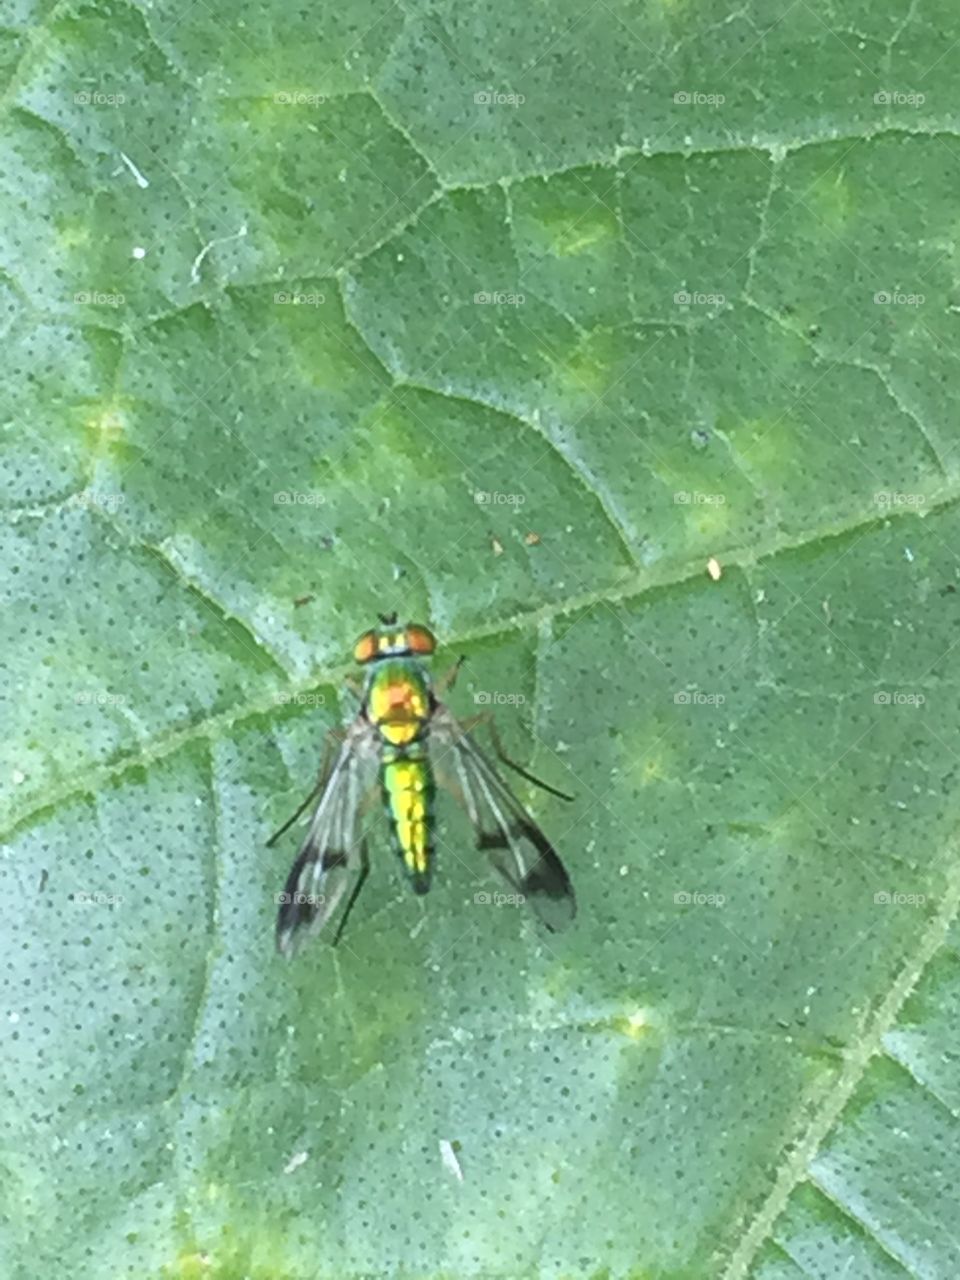 Beautiful fly. Loved the wing pattern on this tiny creature so small but so beautiful